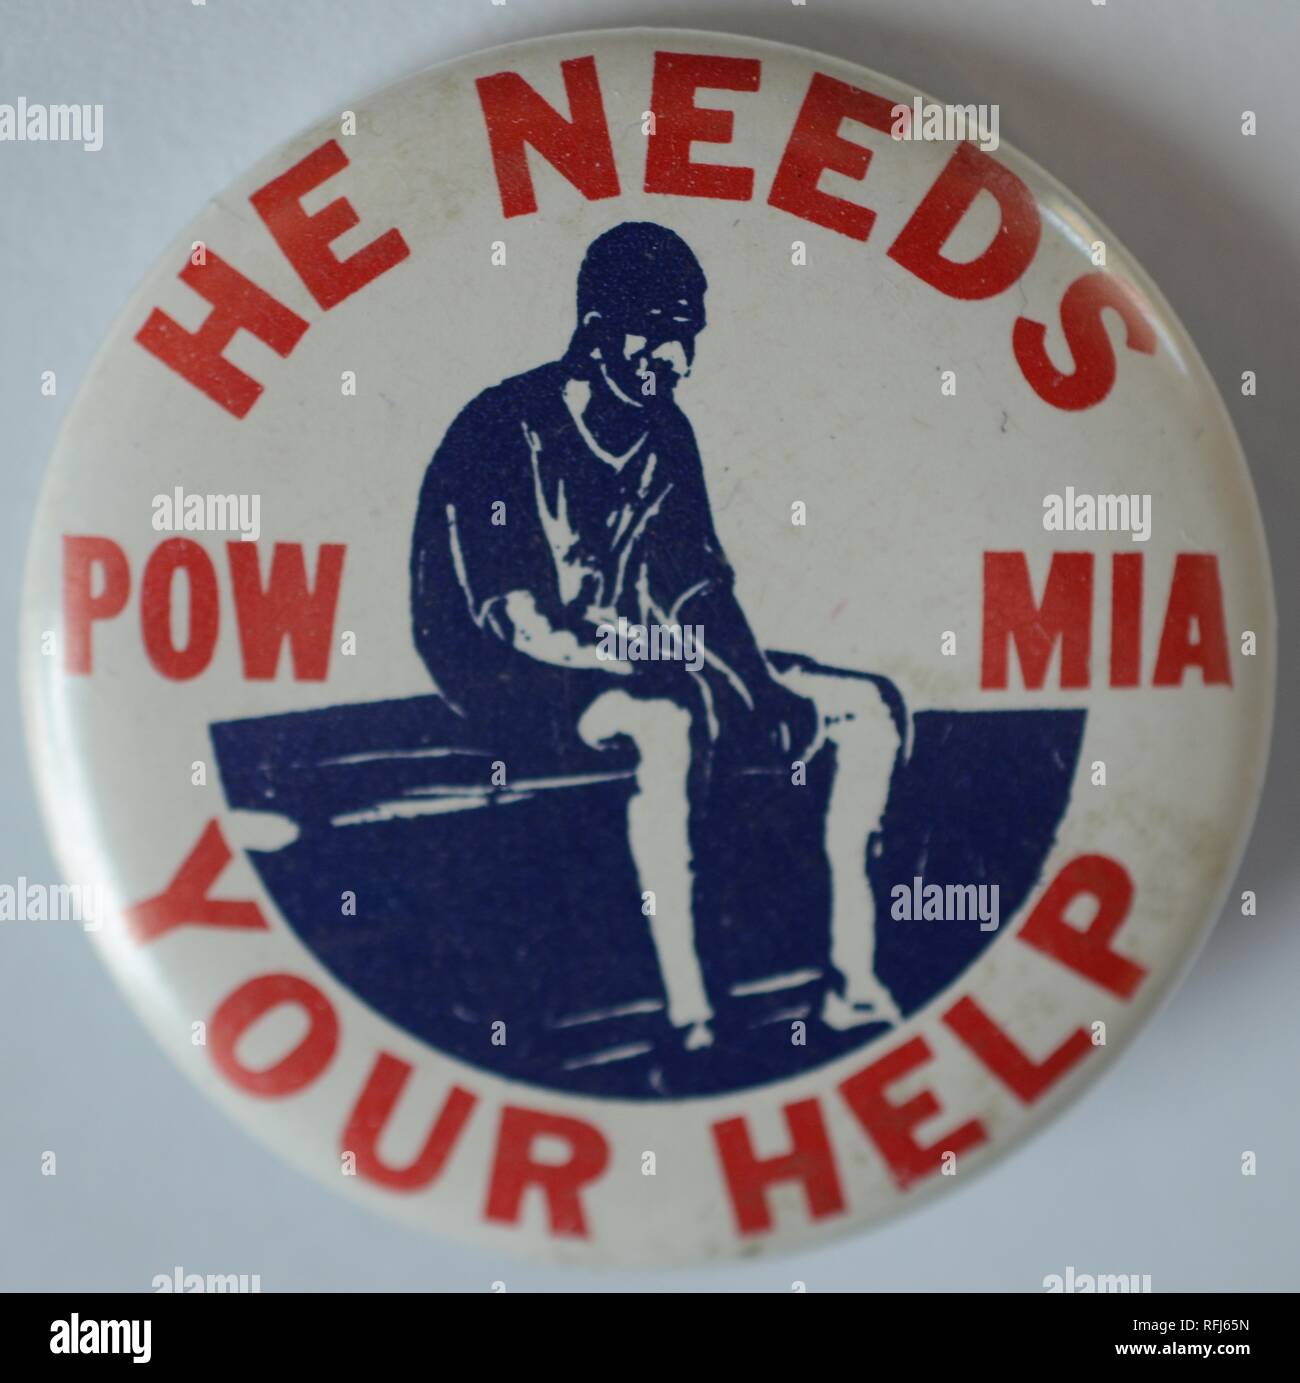 Red, white and blue pinback protest button with silhouette of a prisoner of war sitting forlornly in a cell, with text reading POW MIA He Needs Our Help, advocating for return of Prisoners of War and those Missing in Action during the Vietnam War, 1970. () Stock Photo